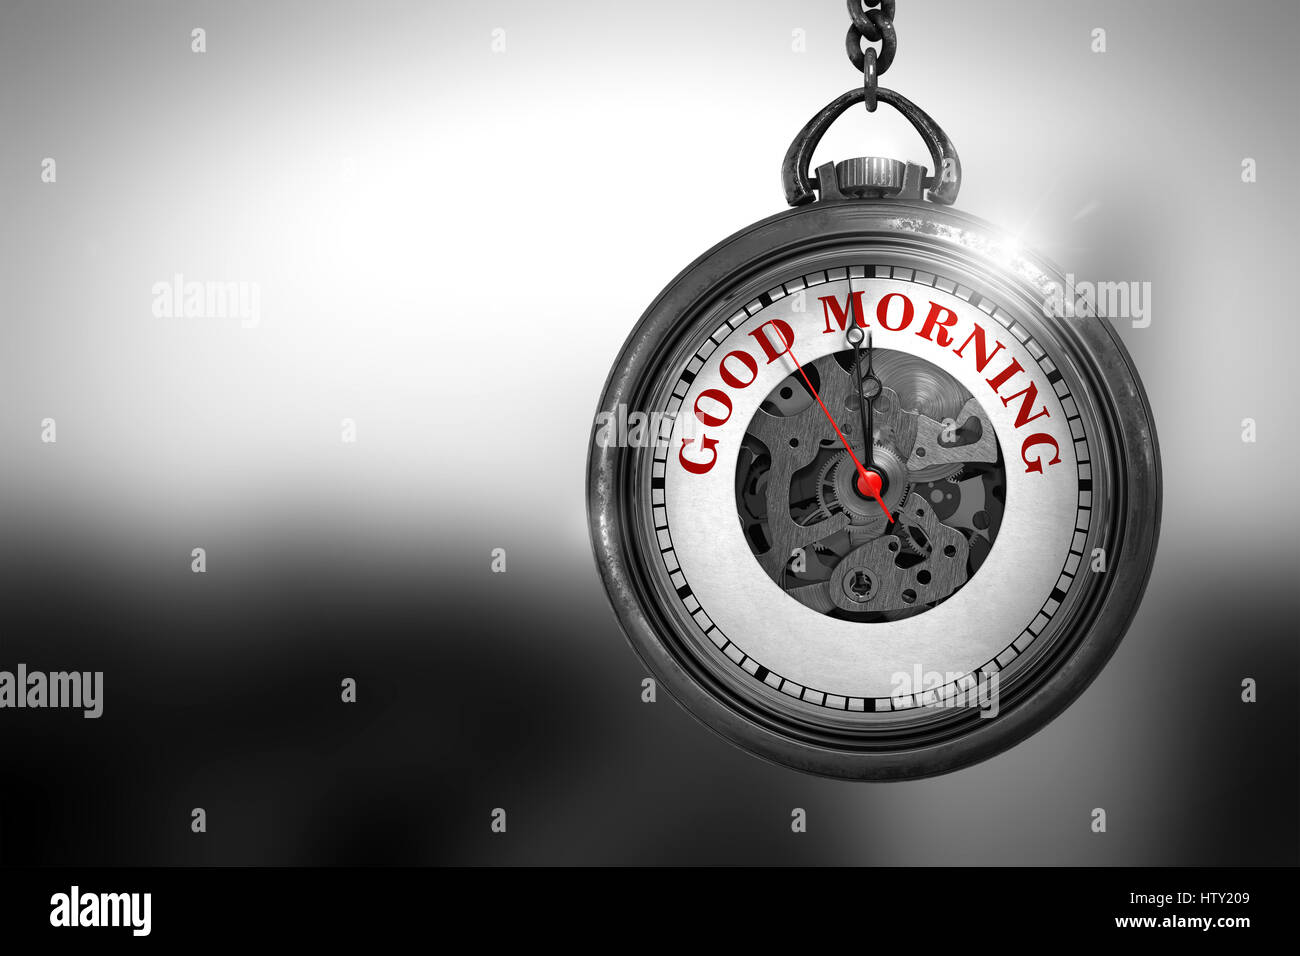 Watch with Good Morning Text on the Face. 3D Illustration. Stock Photo